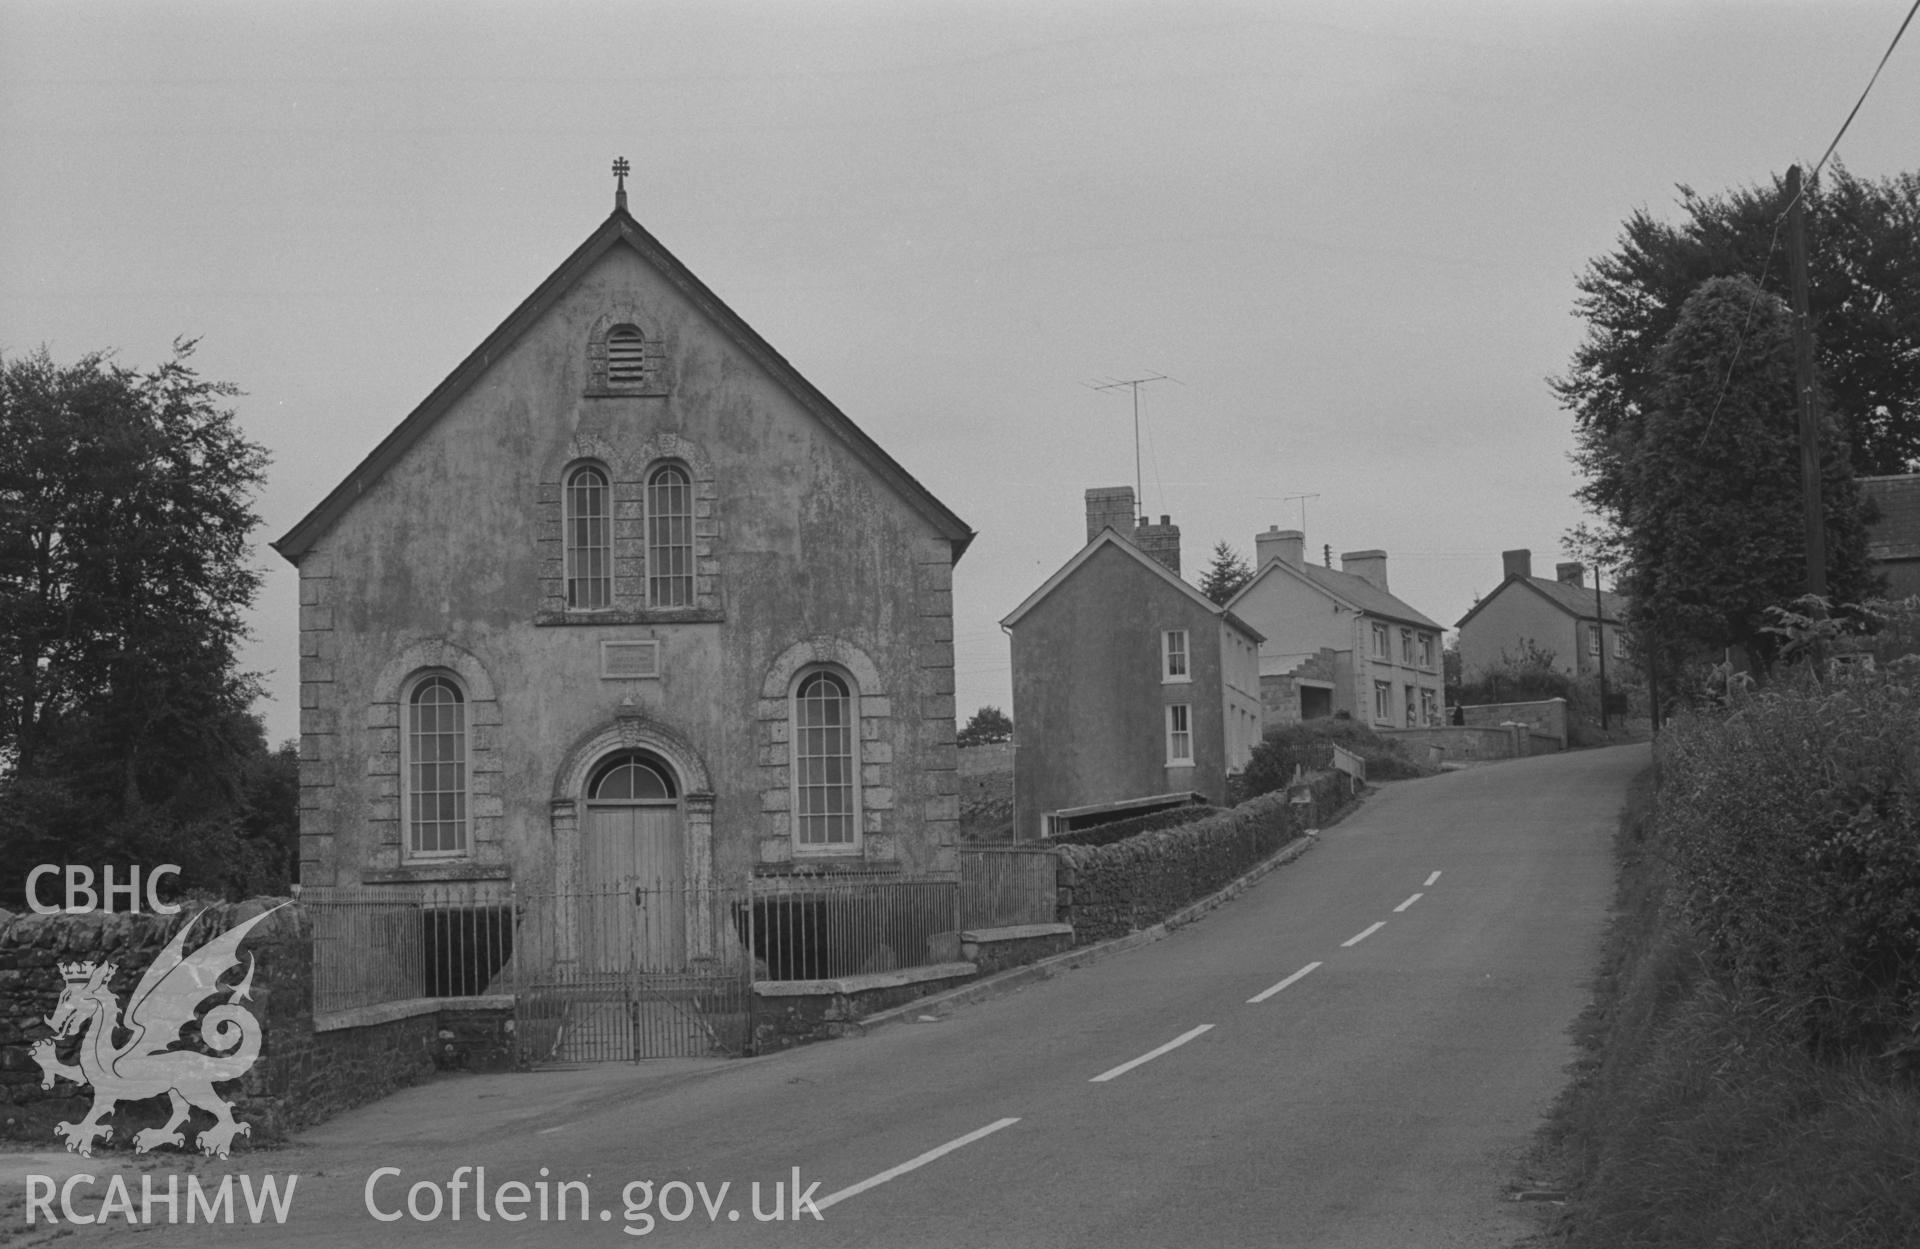 Digital copy of a black and white negative showing external view of Capel-y-Cwm Welsh Unitarian Chapel, Cwmsychbant, Llanwenog. Photographed by Arthur O. Chater in September 1966 looking east from Grid Reference SN 476 462.